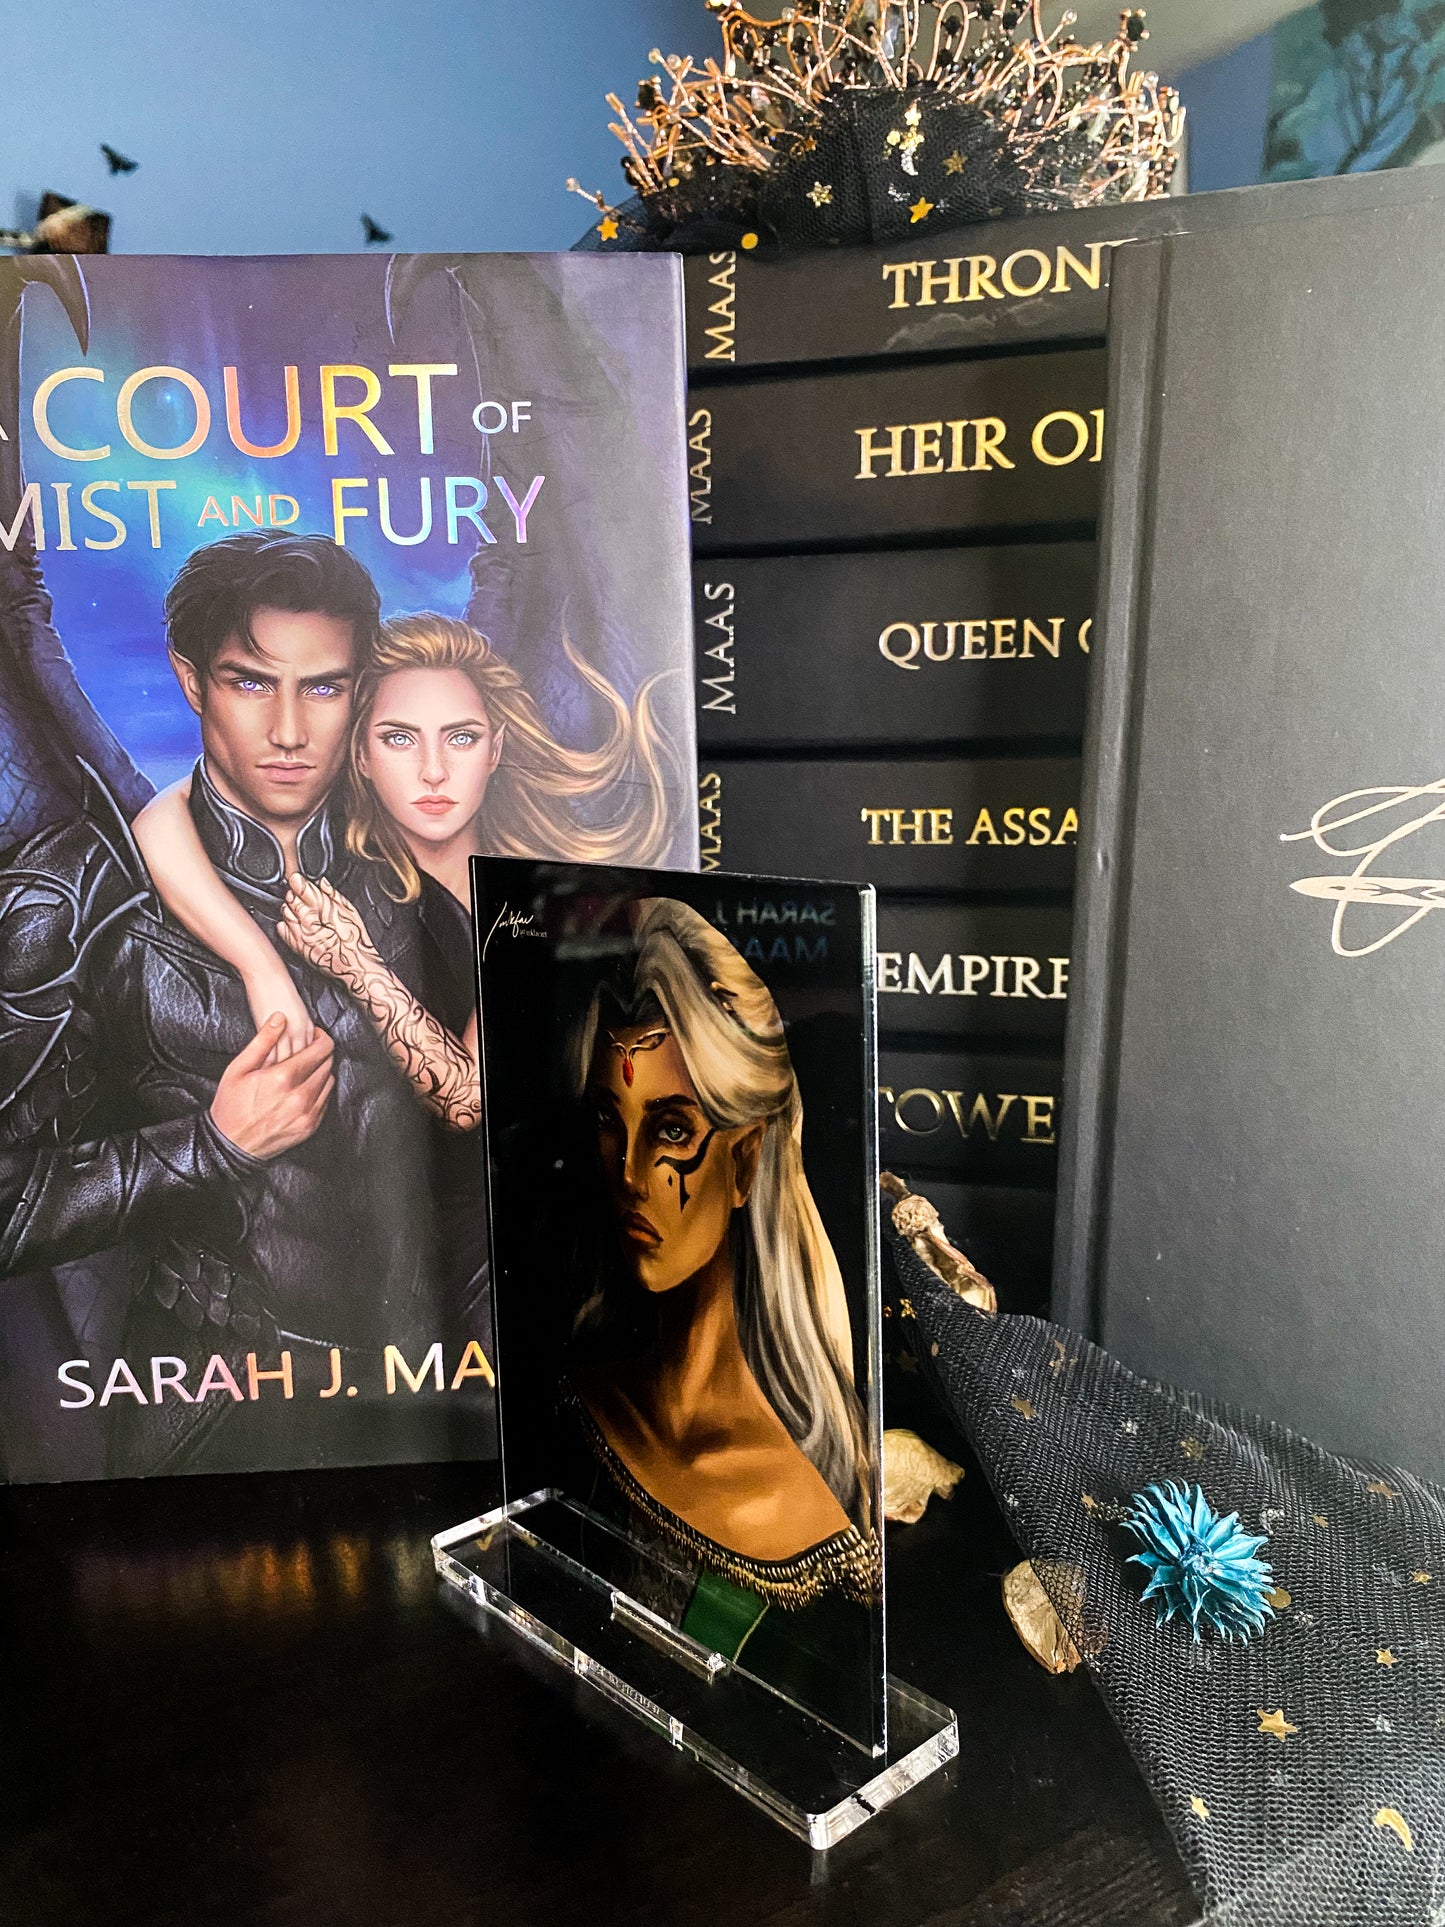 Heir of Snow and Fire - Fan Art from @InkFaeArt - Freestanding Bookshelf / Desktop Acrylic Accessory - Officially licensed by Sarah J. Maas - FA3